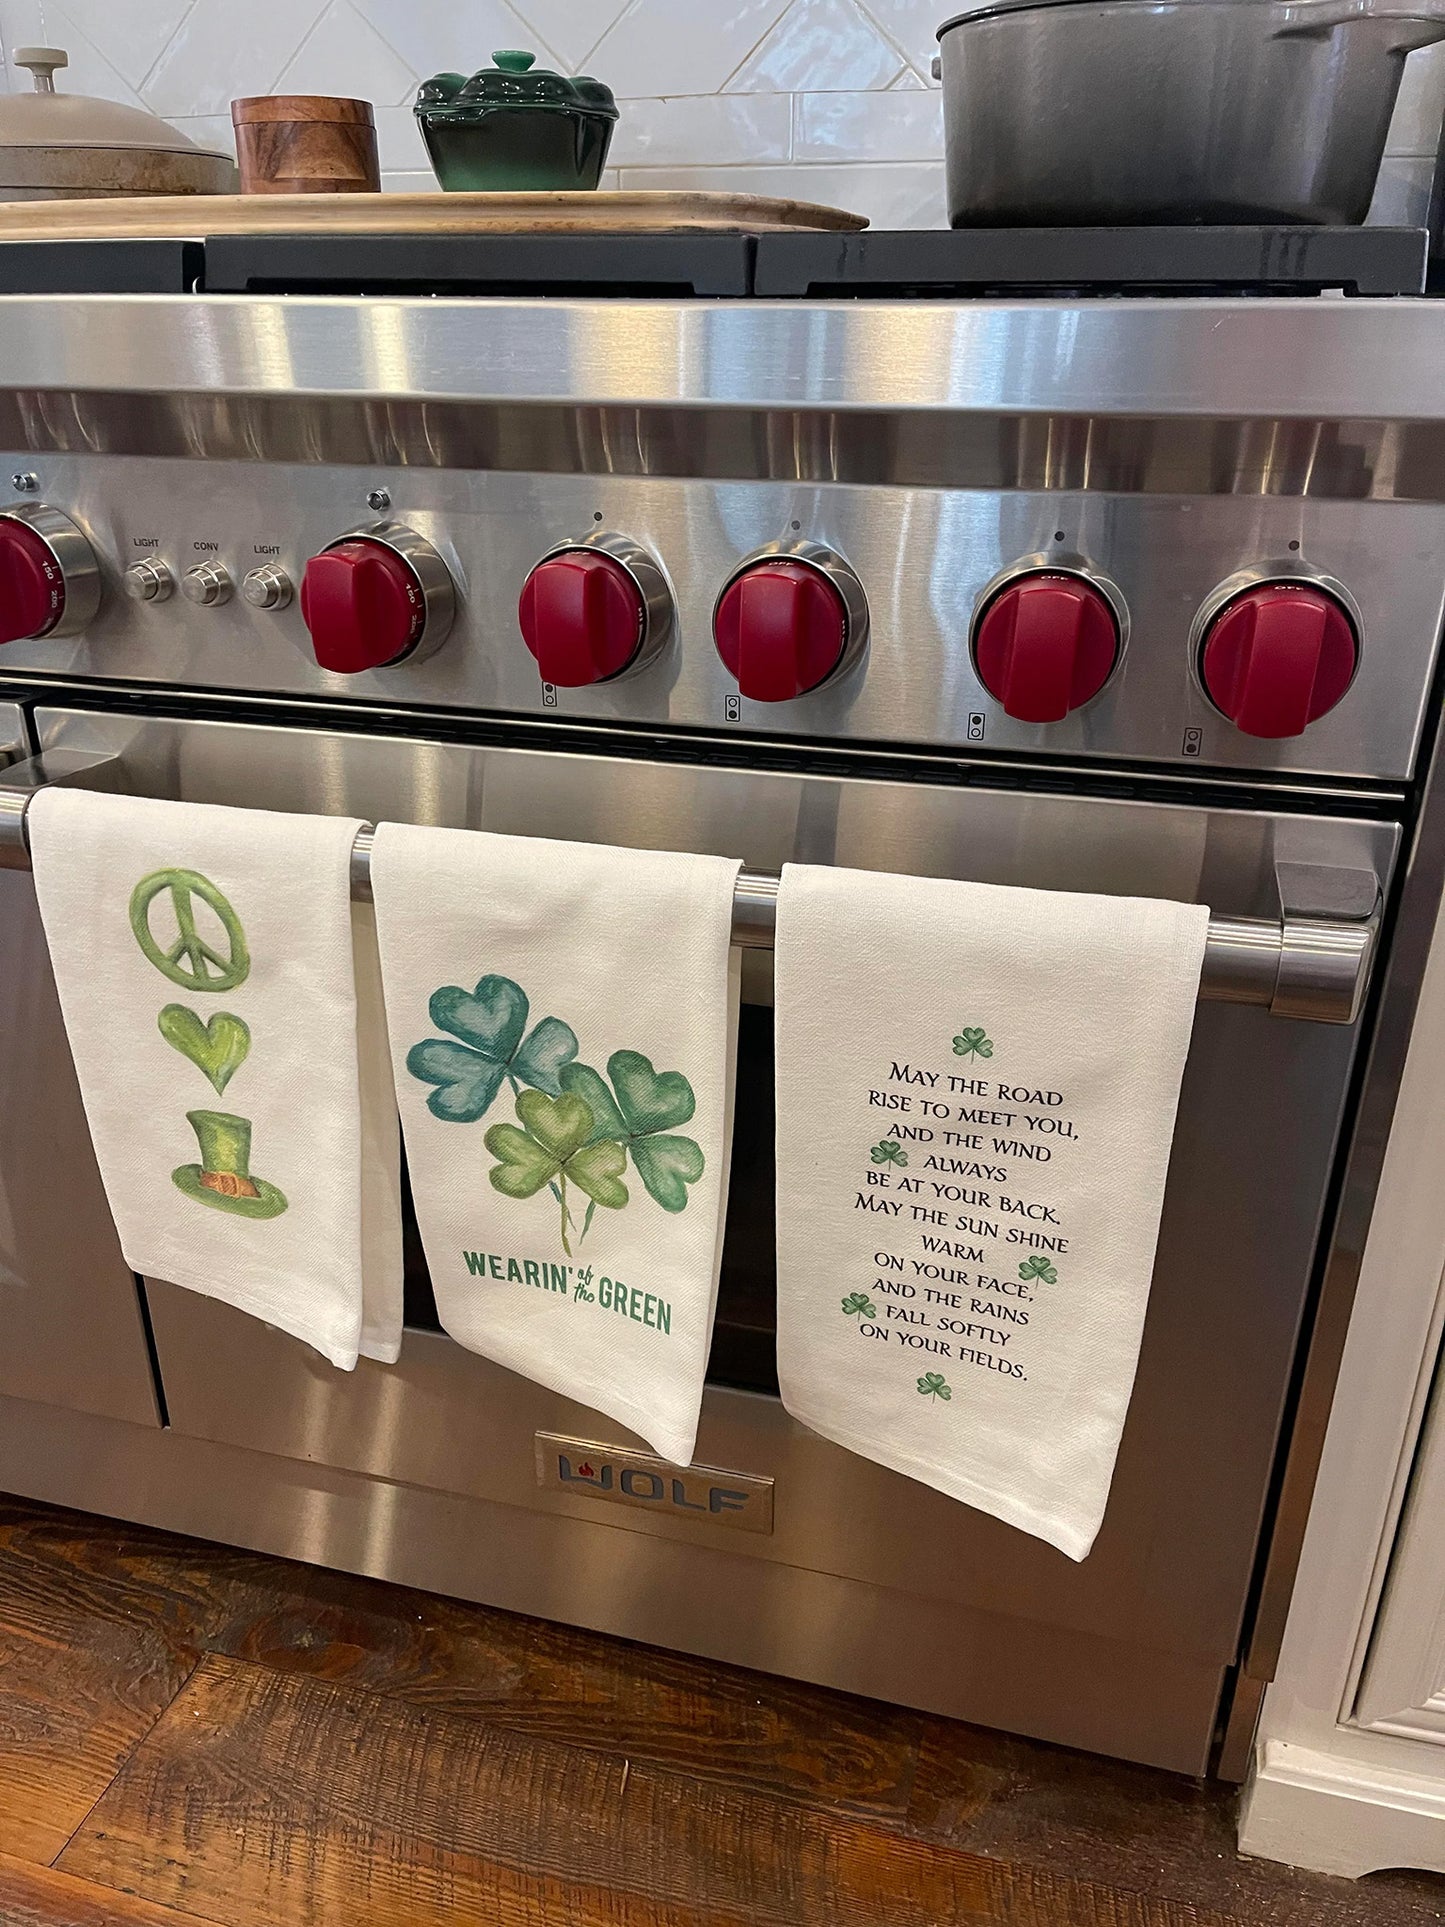 Picture of three kitchen towels with St. Patrick's Day themes